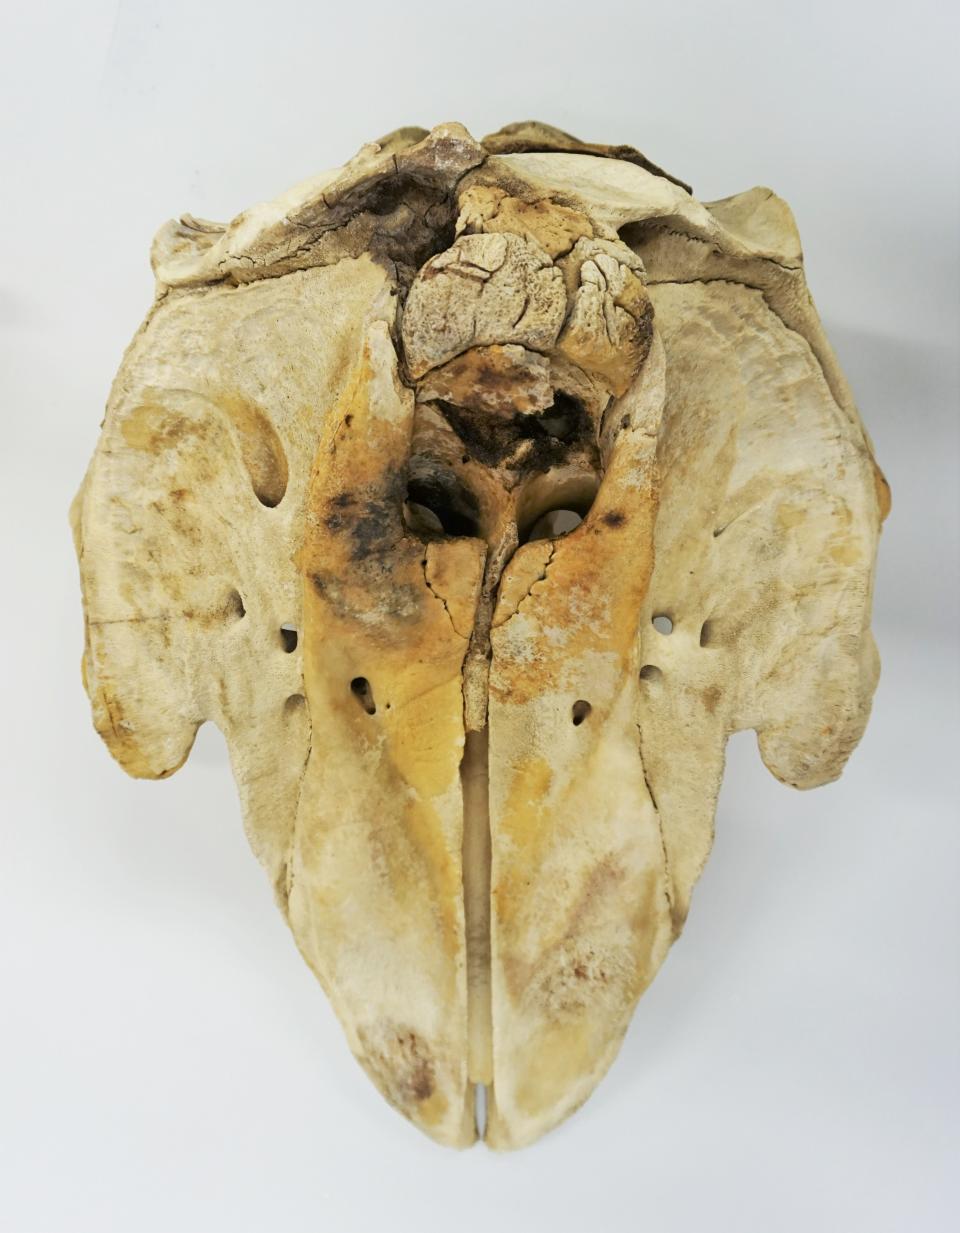 Researchers examined the whale’s skull (National Museums Scotland/PA)